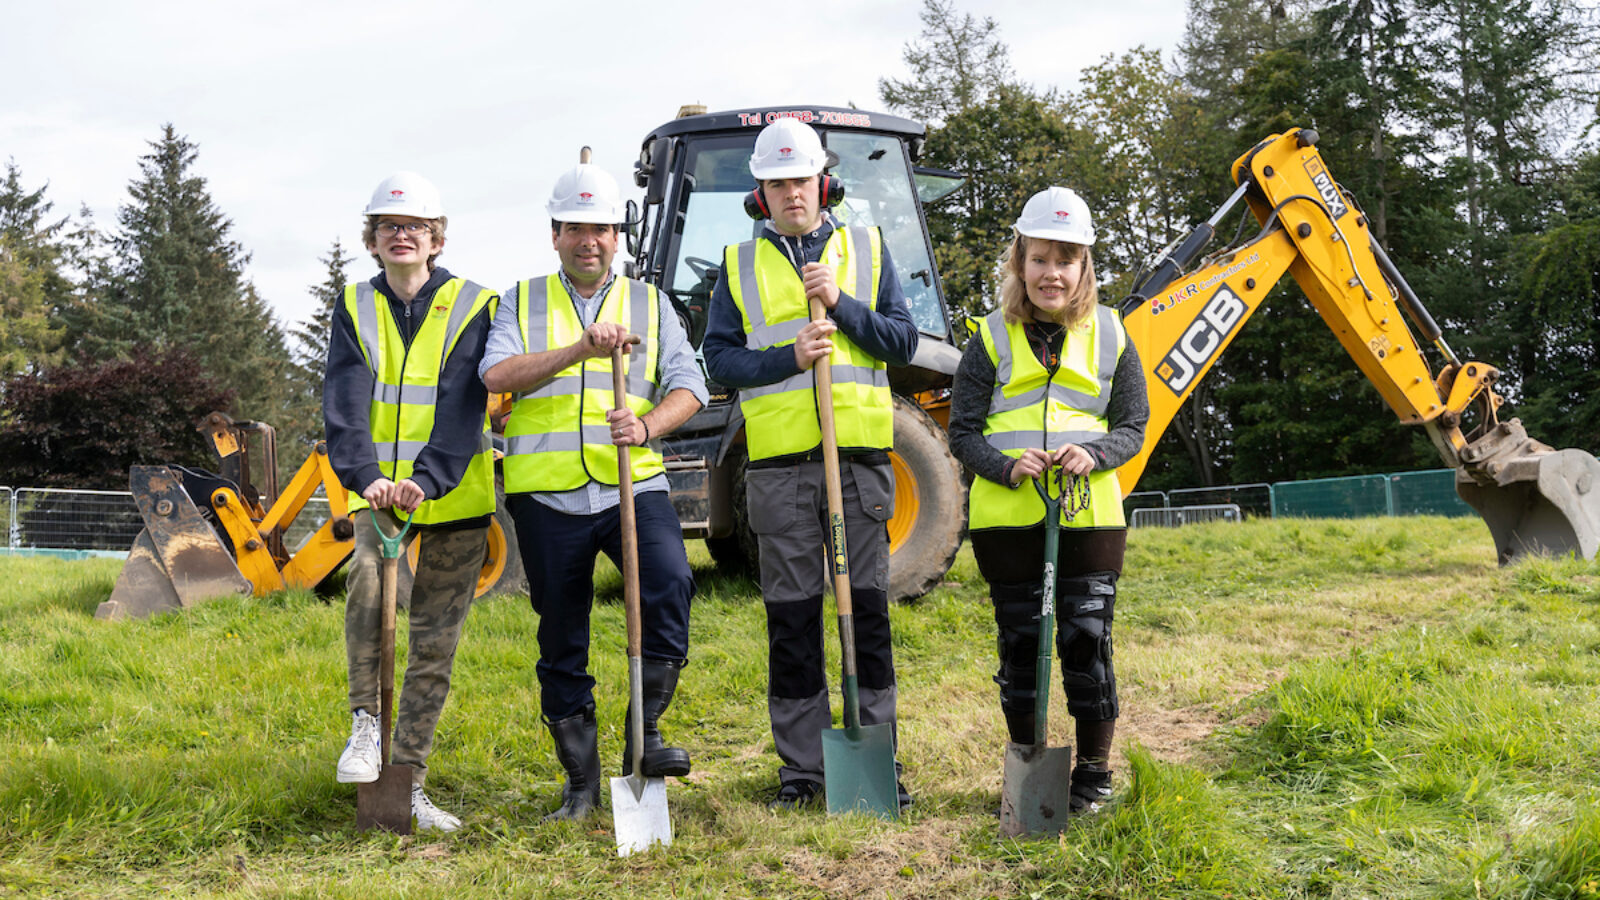 Camphill School Aberdeen students join Executive Director Alex Busch to break ground on the site of their new 11 bedroom-residential house at the charity’s Murtle EstateL-R Duncan Ewen (student), Alex Busch (Executive Director), Steven Campsie (student), Freya Laird-Bisset (student)